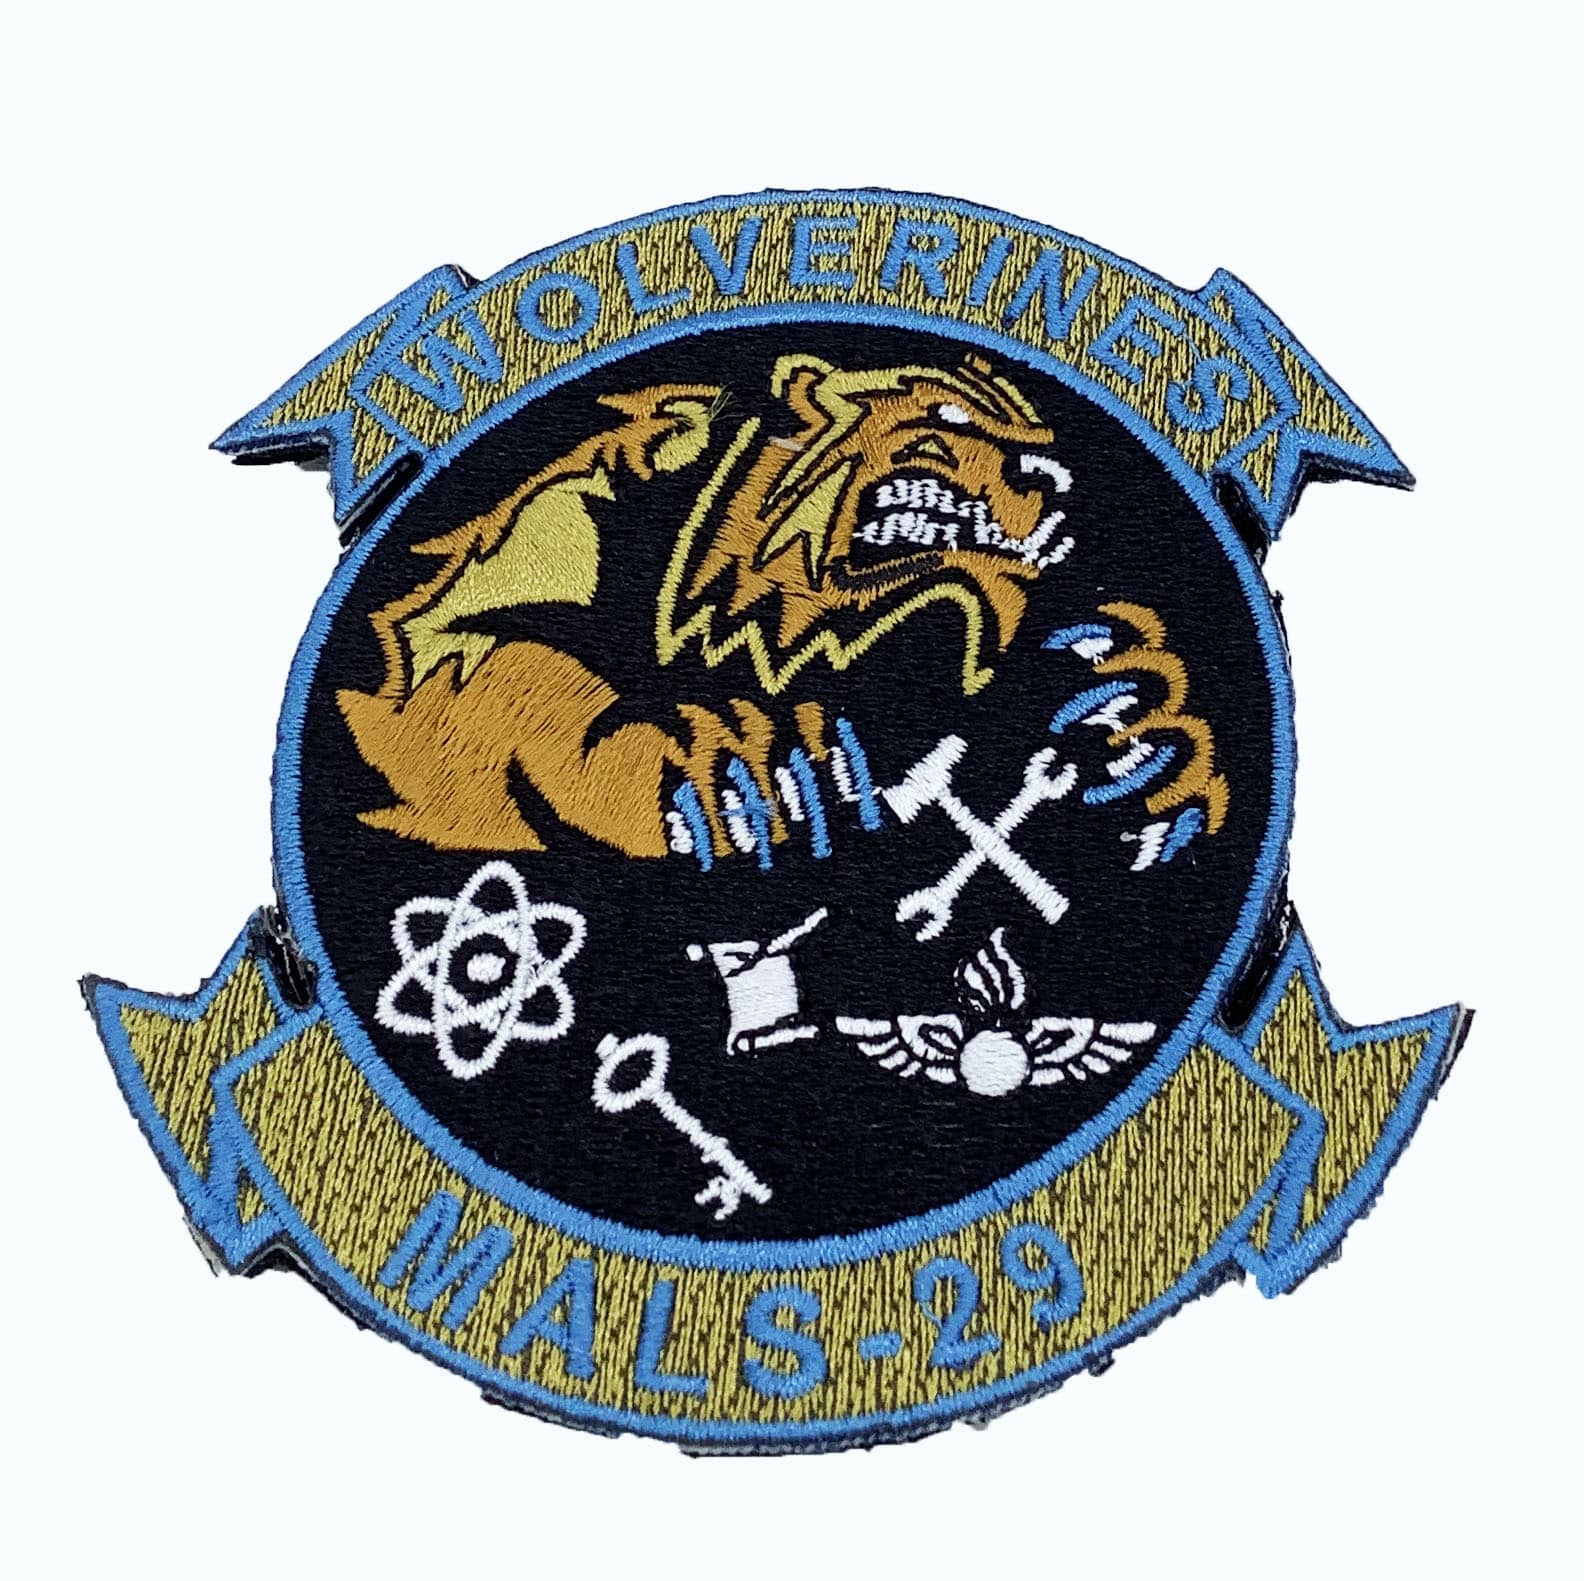 MALS-29 Wolverines 2018 Patch – With Hook and Loop - Squadron Nostalgia